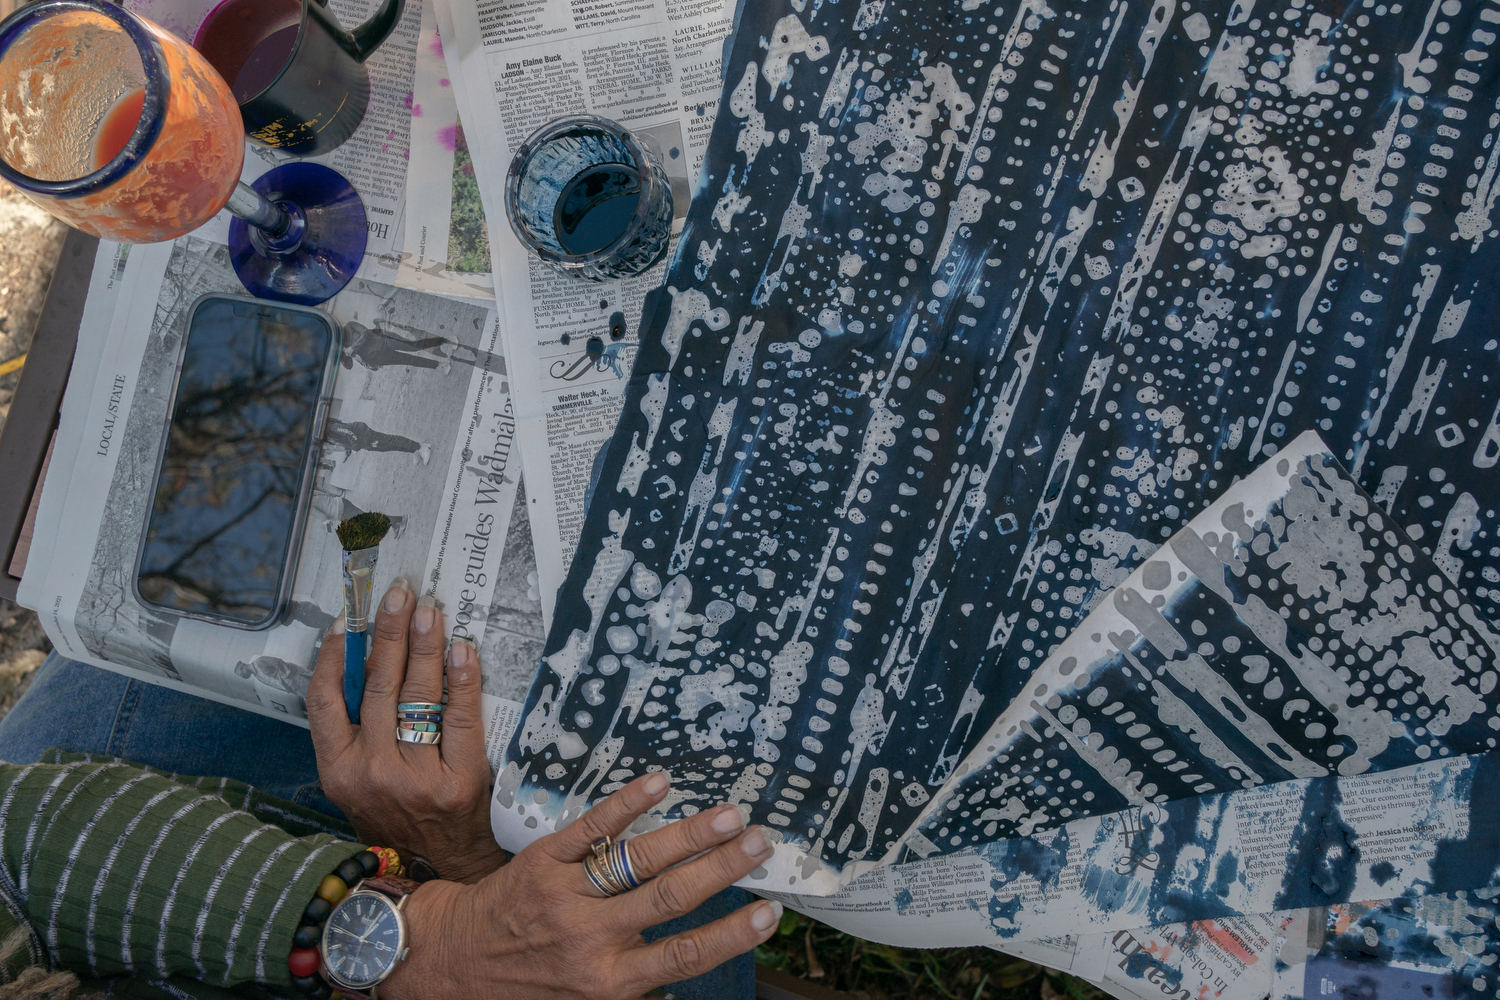 Arianne King Comer works on an indigo batik design made on rice paper at Pluff Mudd Farm, in Wadmalaw Island, South Carolina. King Comer uses hot wax dots and lines and brushed on layers of indigo dye to create a pattern.